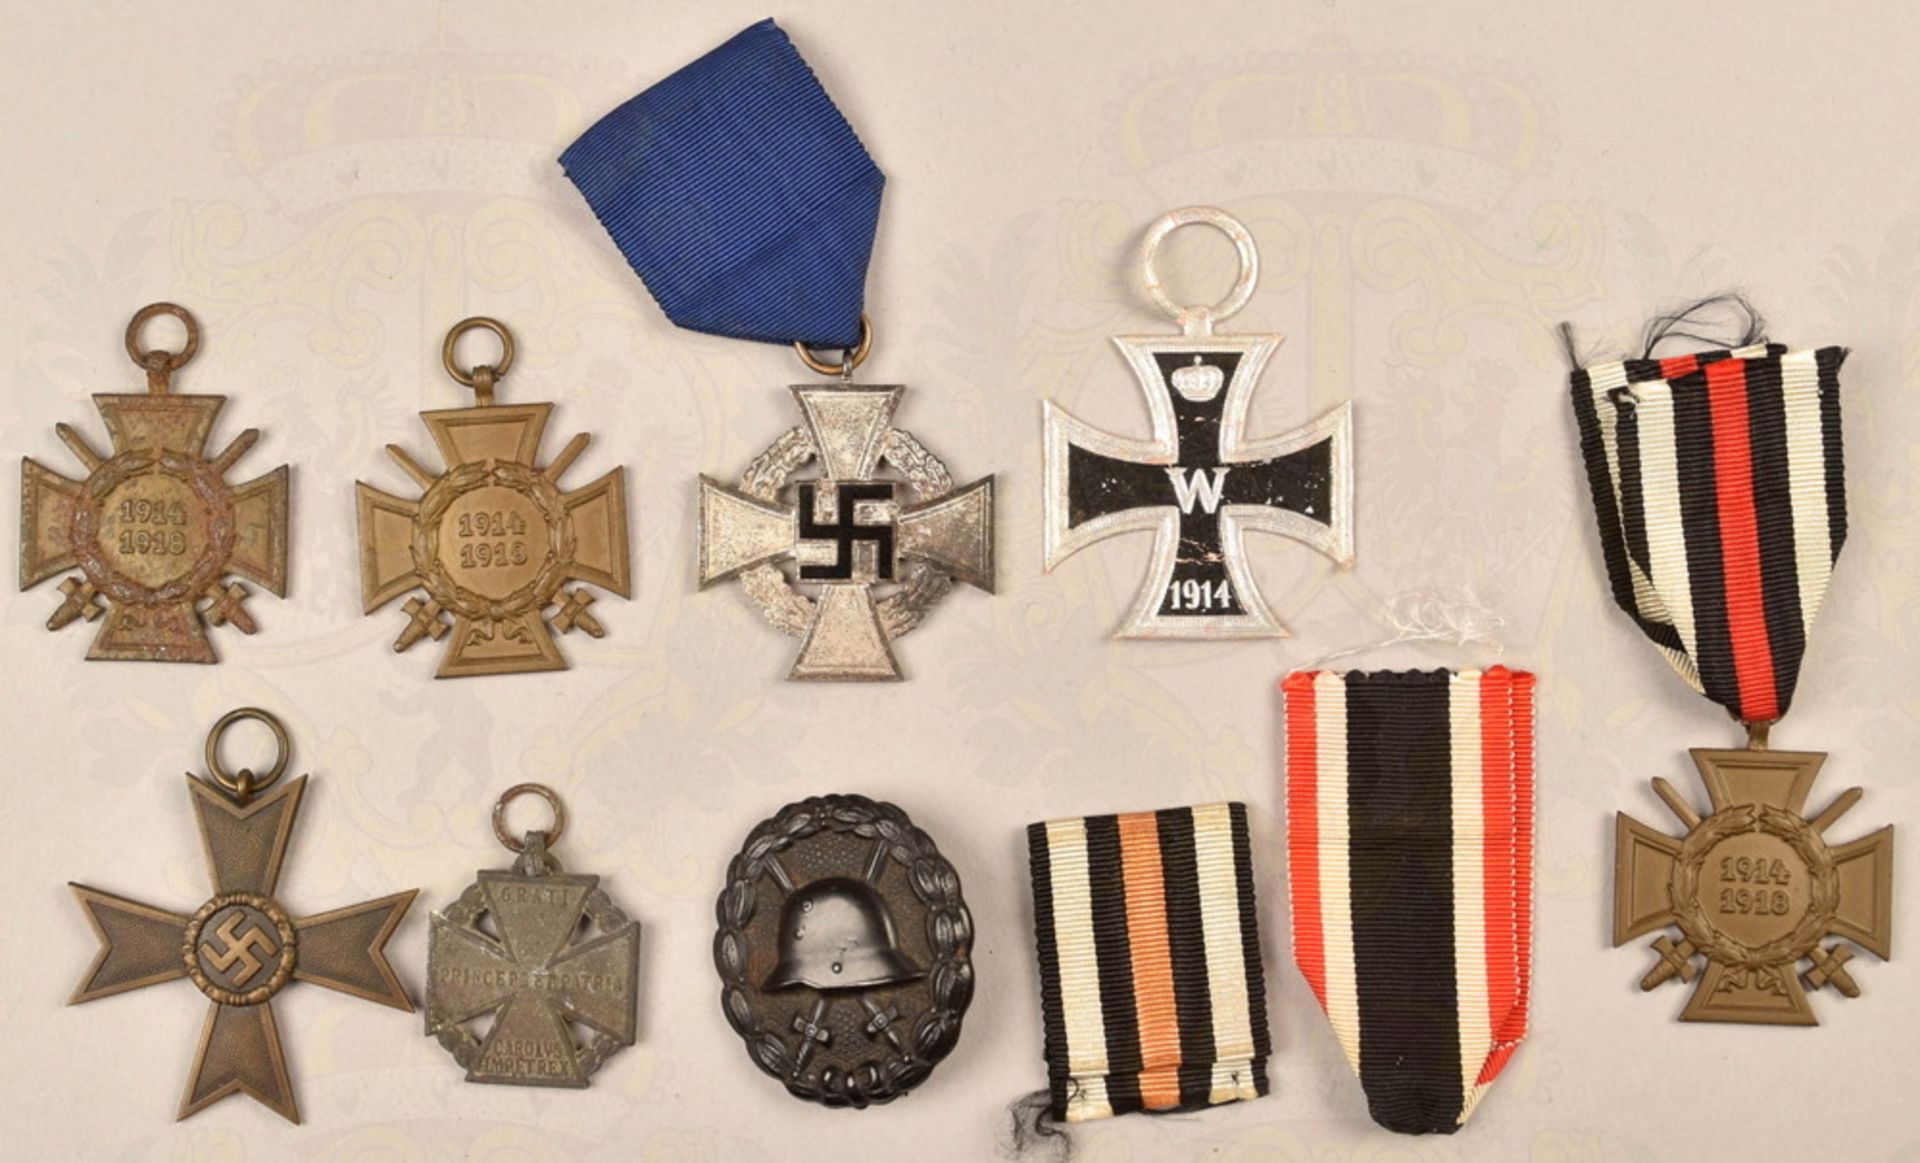 7 German military decorations - Image 2 of 2